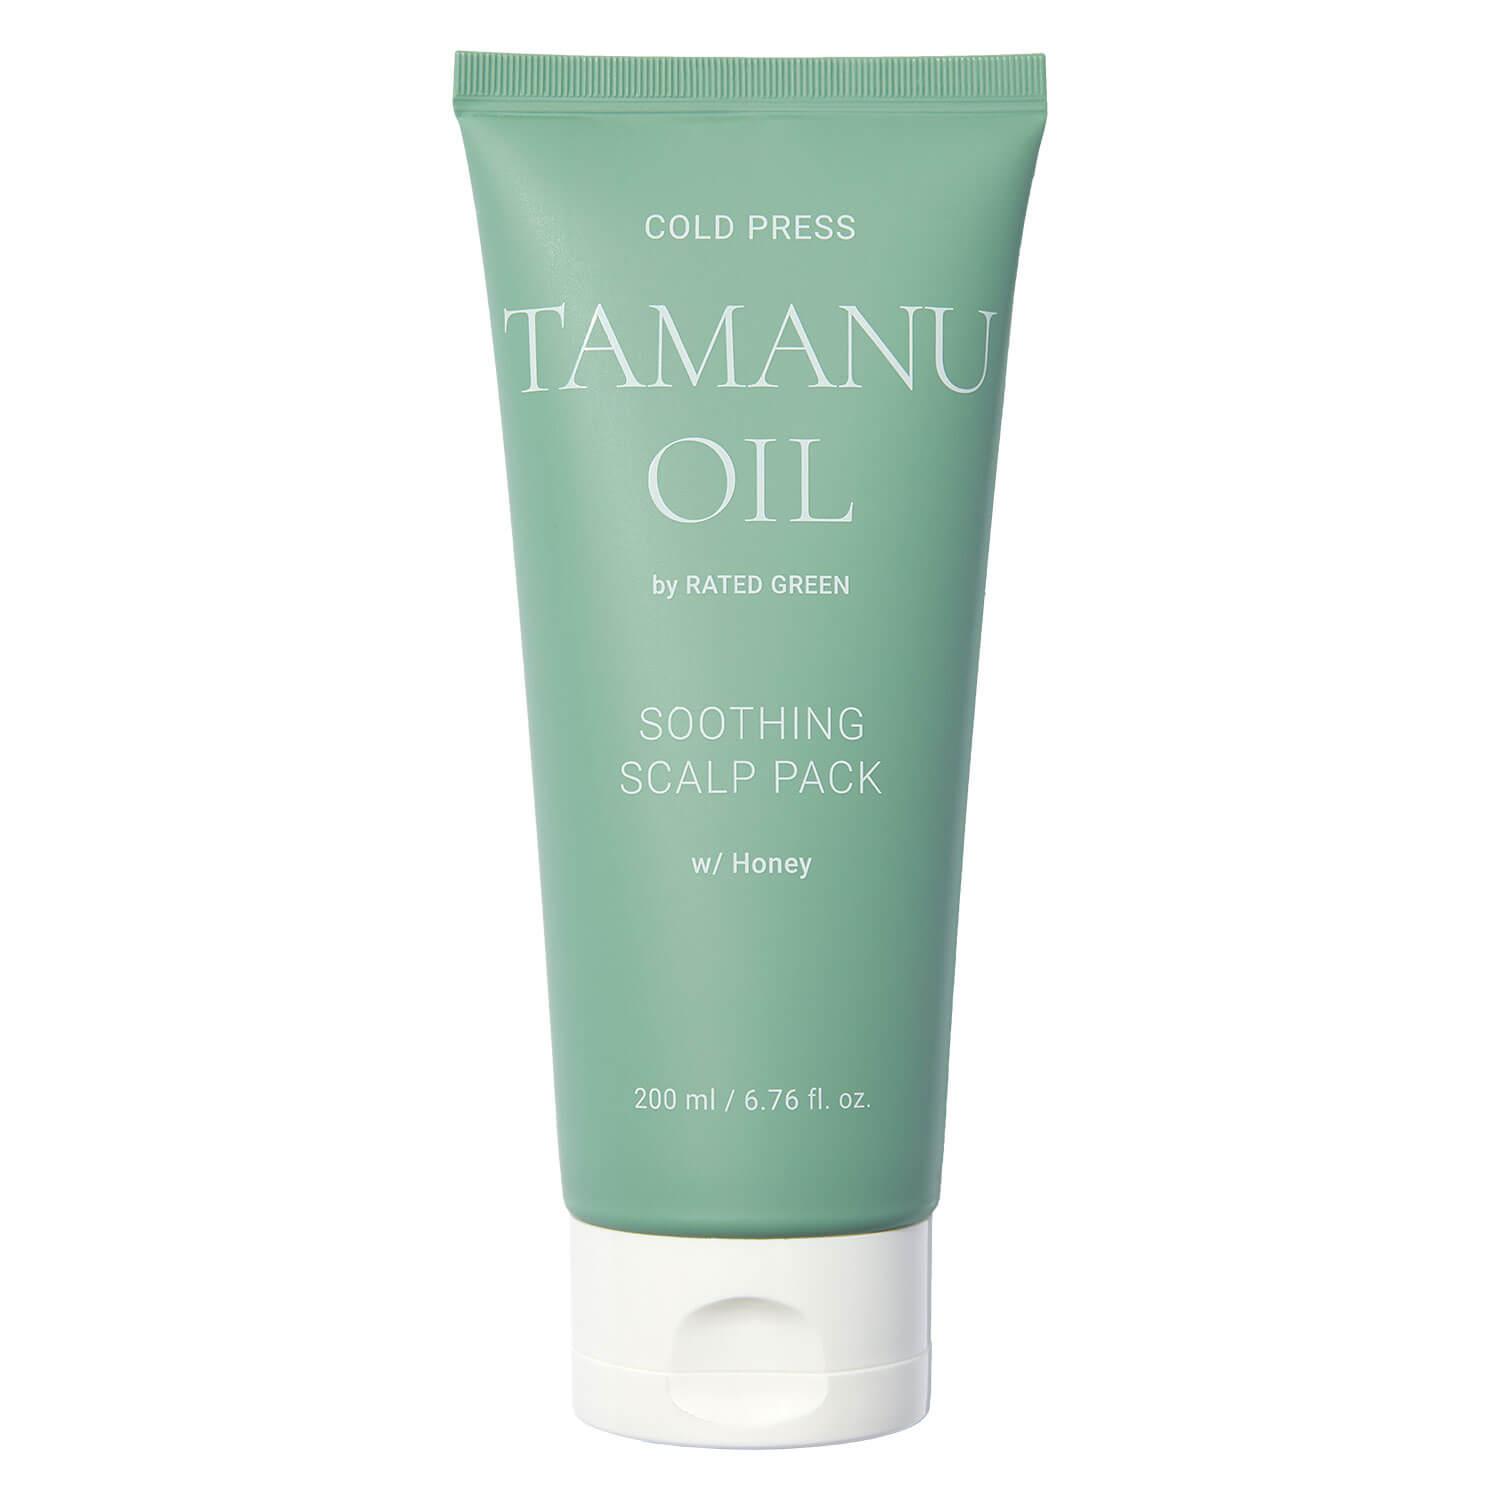 RATED GREEN - Cold Press Tamanu Oil Soothing Scalp Pack